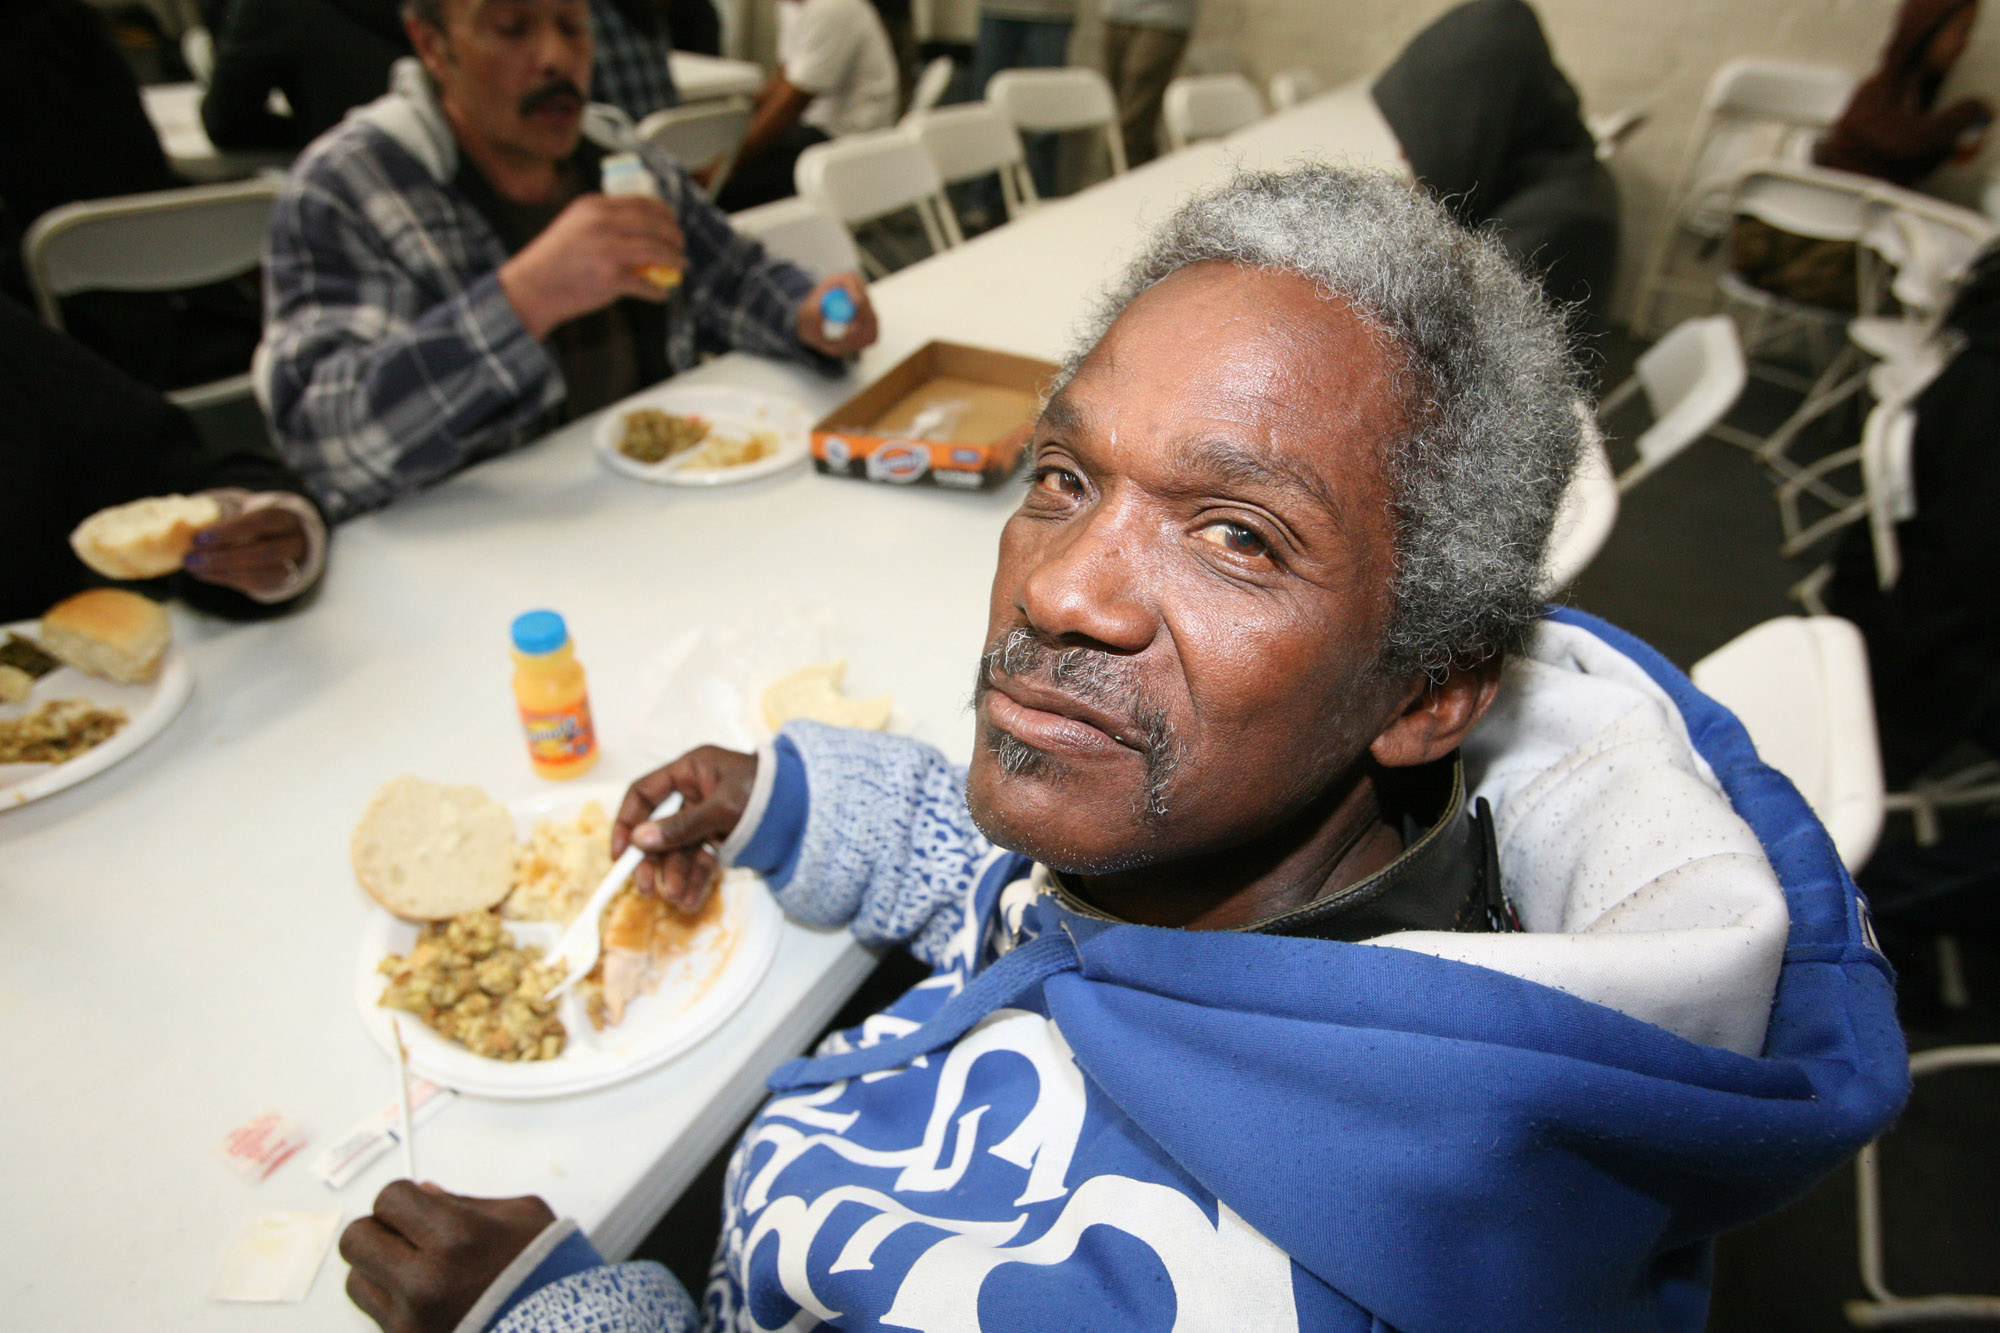 L.A.'s Skid Row is home to more than 8,000 homeless people. With the help of domestic hunger funds given through the North American Mission Board, Set Free Church was able to provide a hot meal on Thanksgiving last year. Photo by Greg Schneider